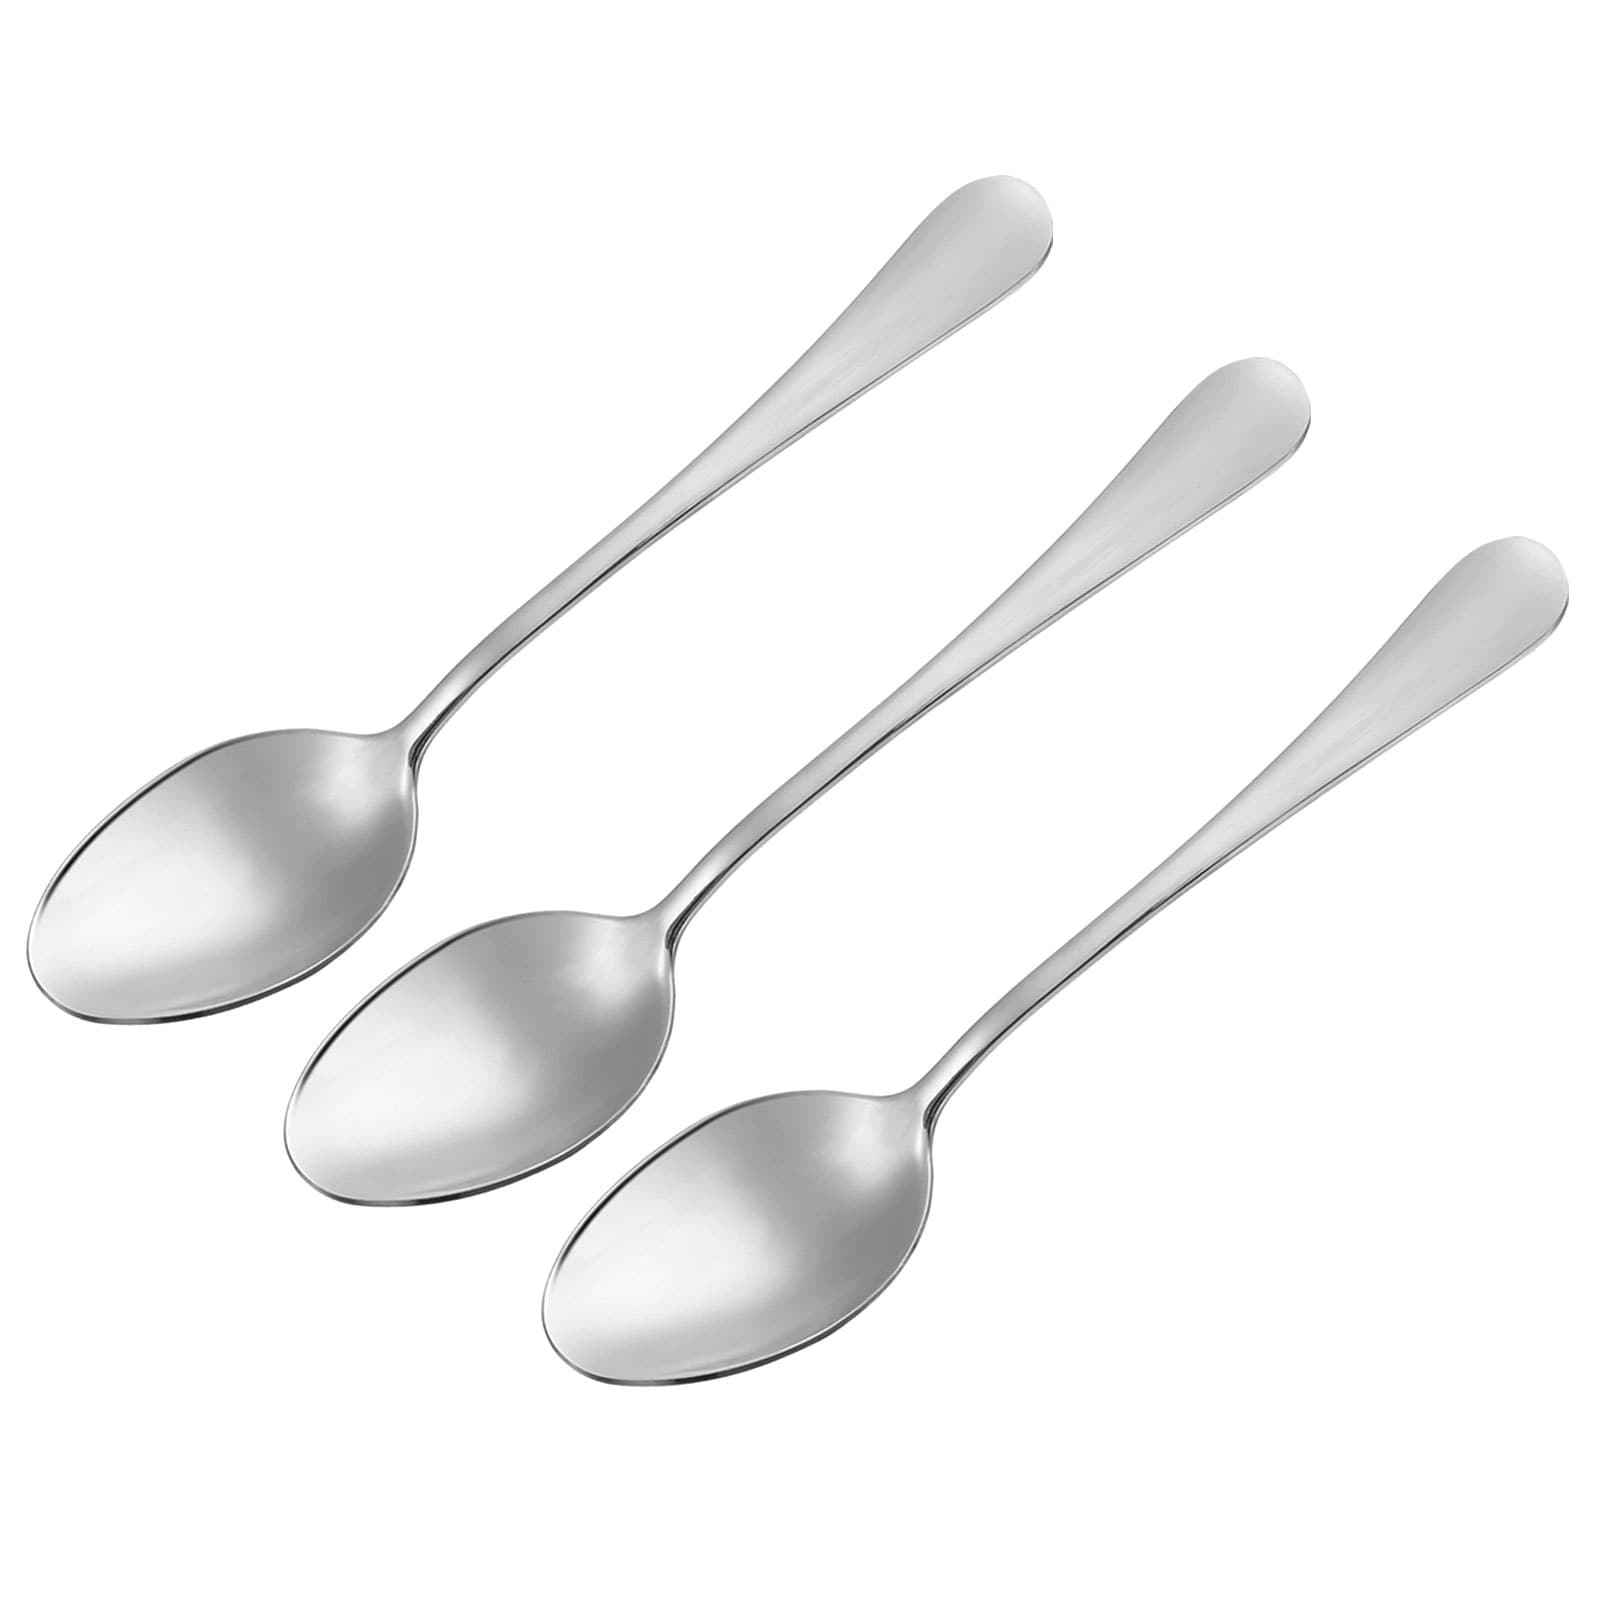 https://ak1.ostkcdn.com/images/products/is/images/direct/a1c1e6eb598adf86c605c1f0aa7b7eb182eb62d6/Metal-Spoons-Stainless-Steel-Spoon-for-Home-Kitchen.jpg